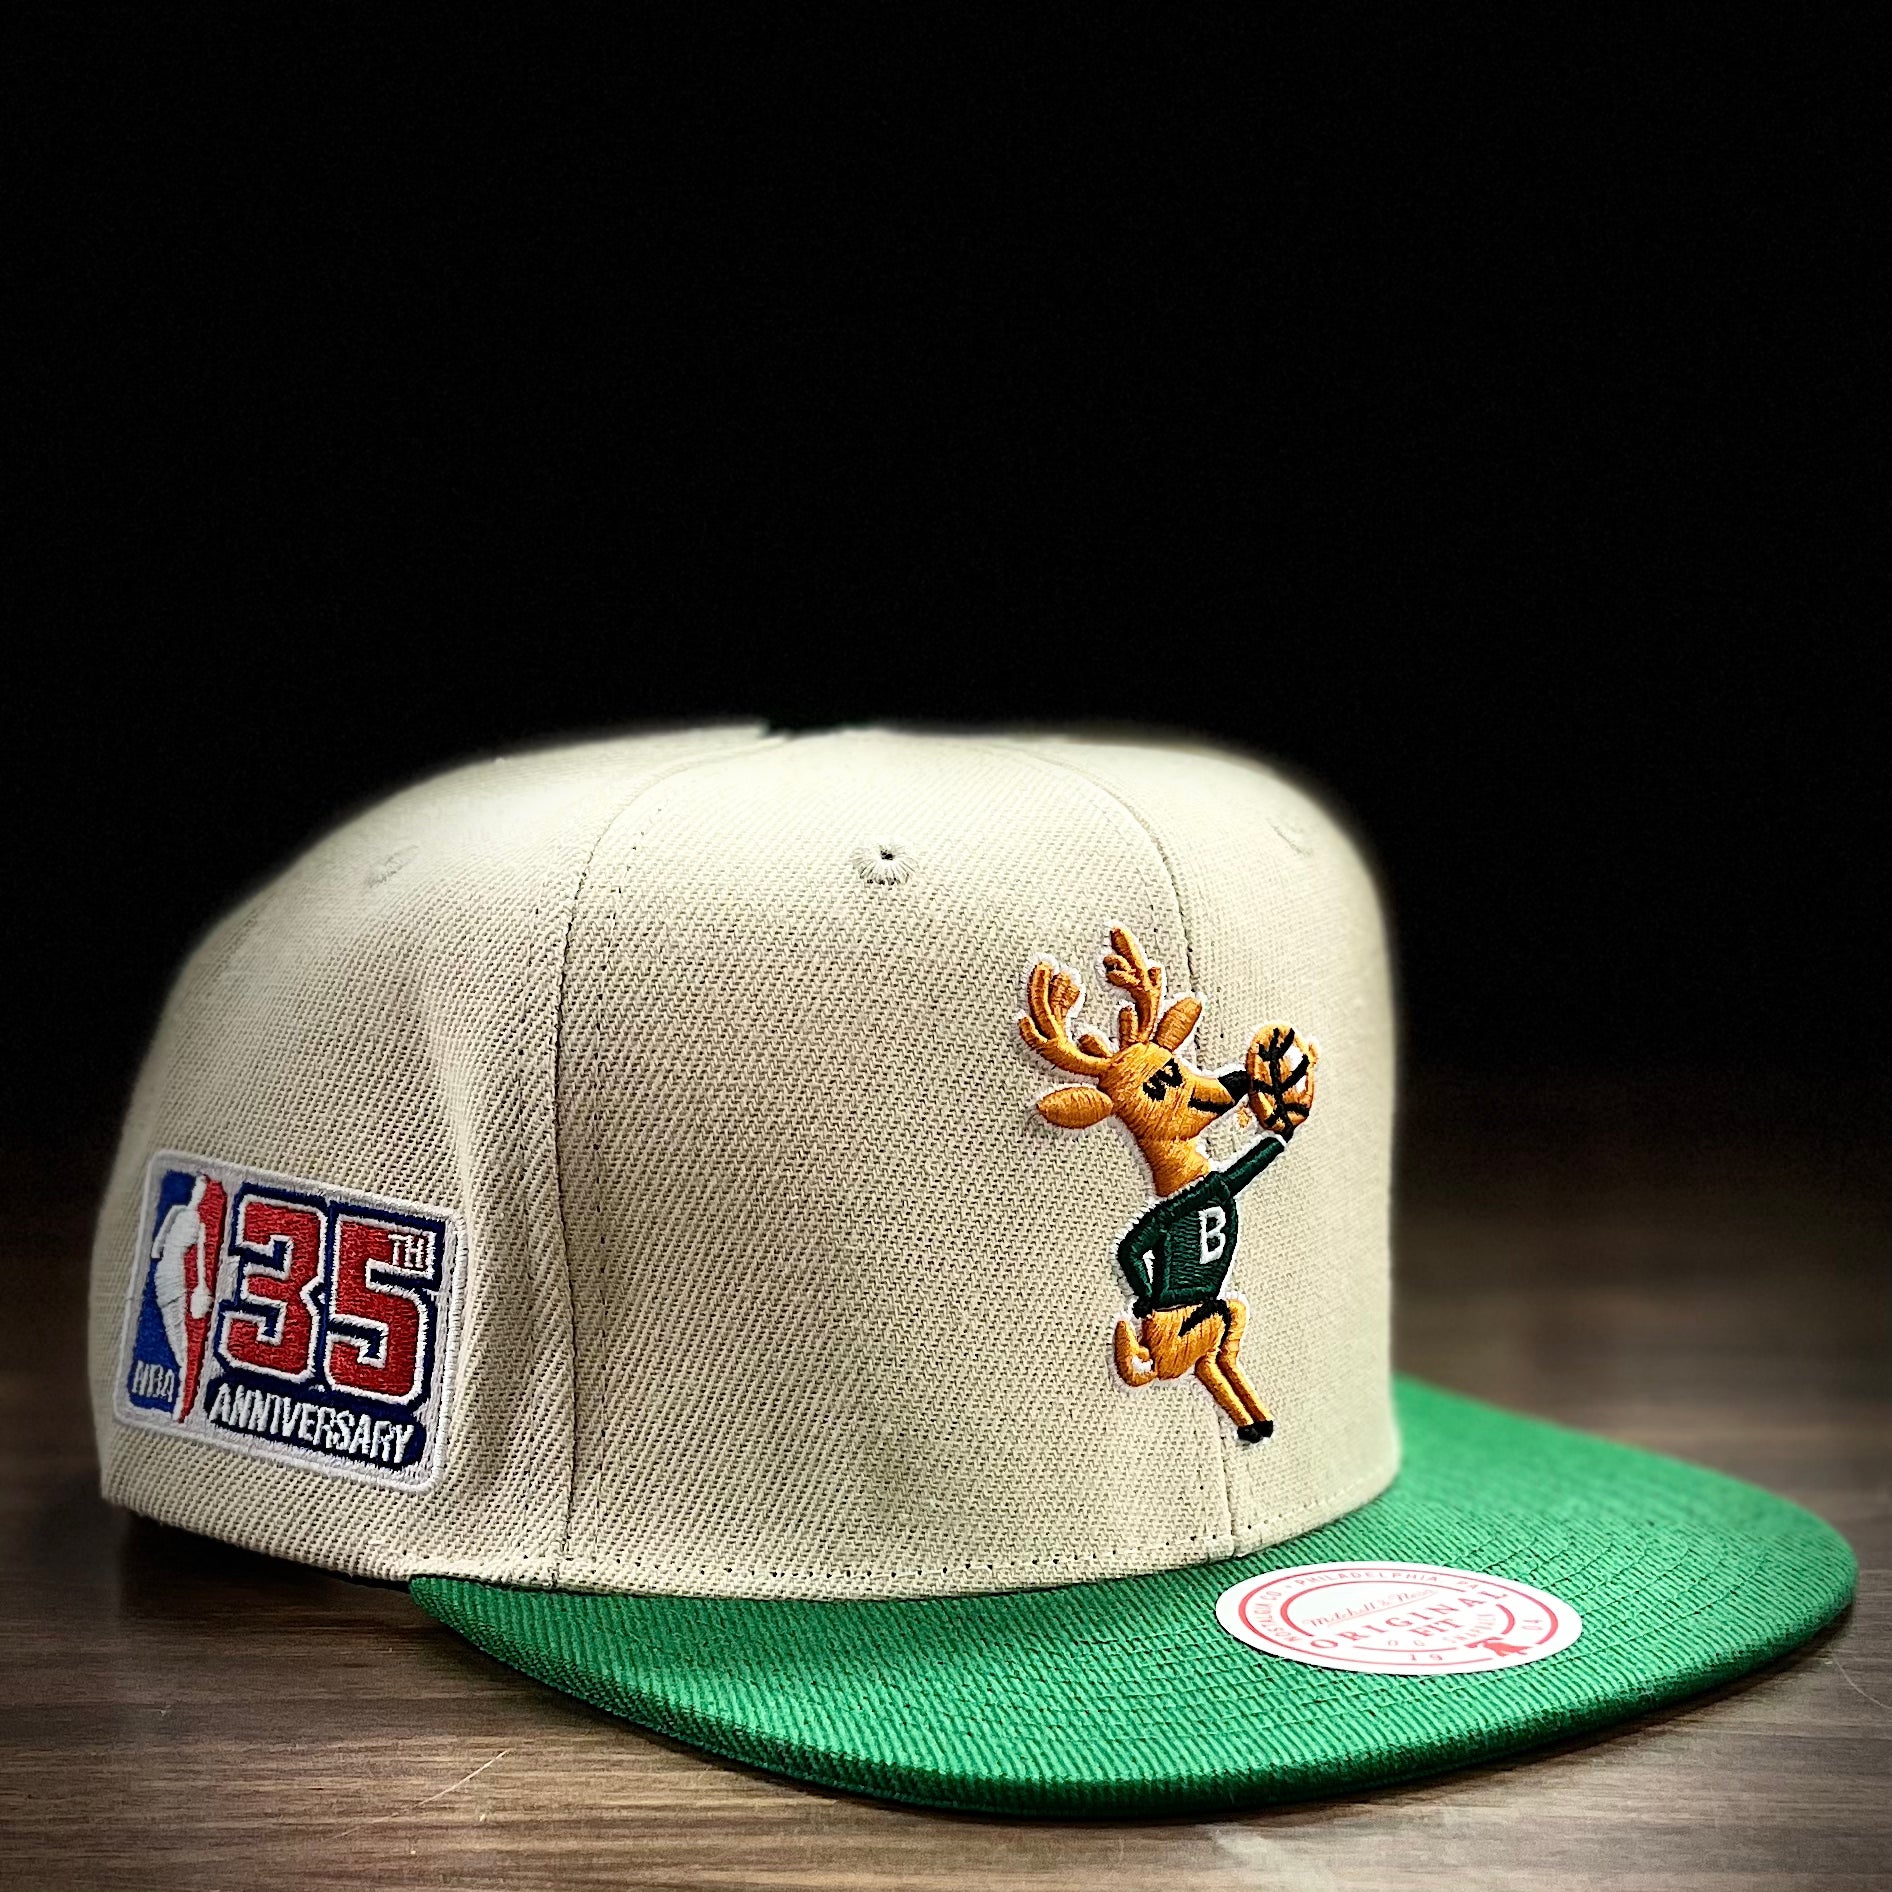 New Milwaukee Bucks Mitchell & Ness Vintage 90s Style SnapBack Cap Hat for  Sale in Anaheim, CA - OfferUp